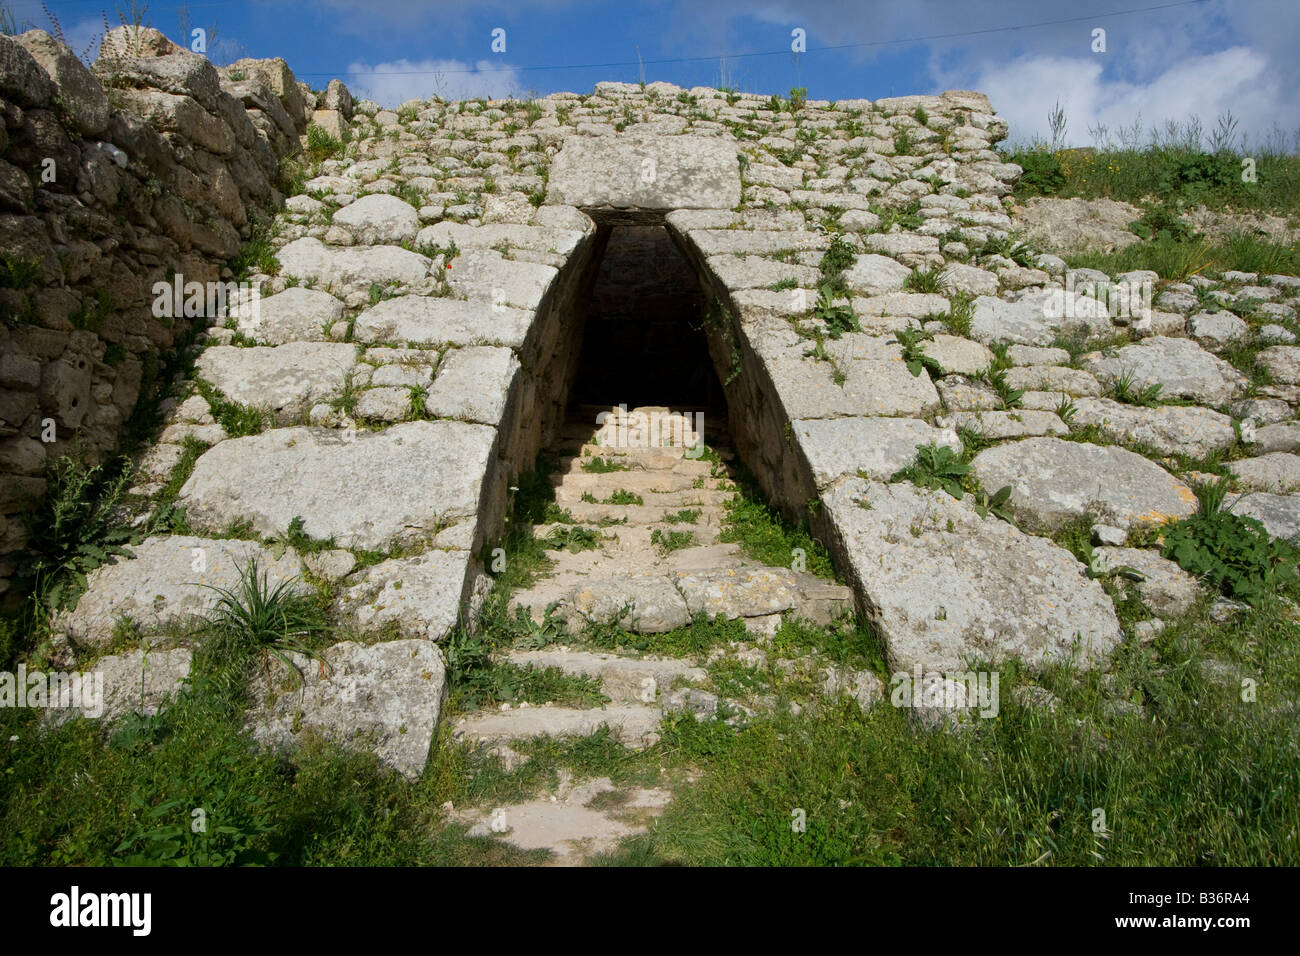 Ancient Ruins of Ugarit at Lattakia in Syria Stock Photo